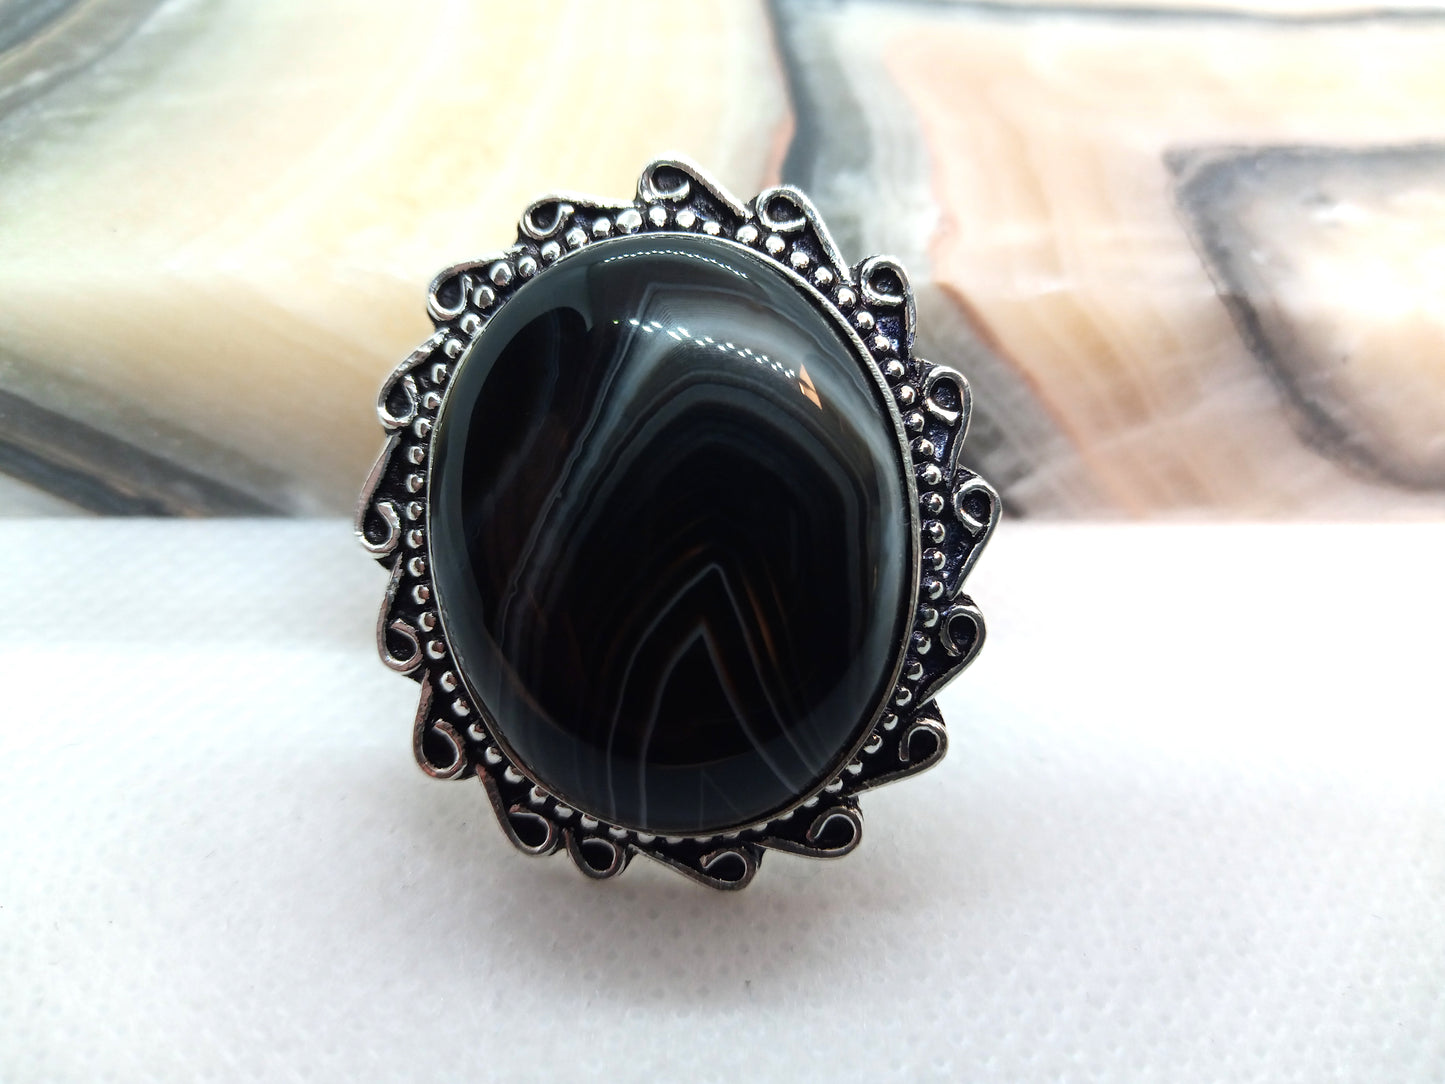 Onyx ring in the sun